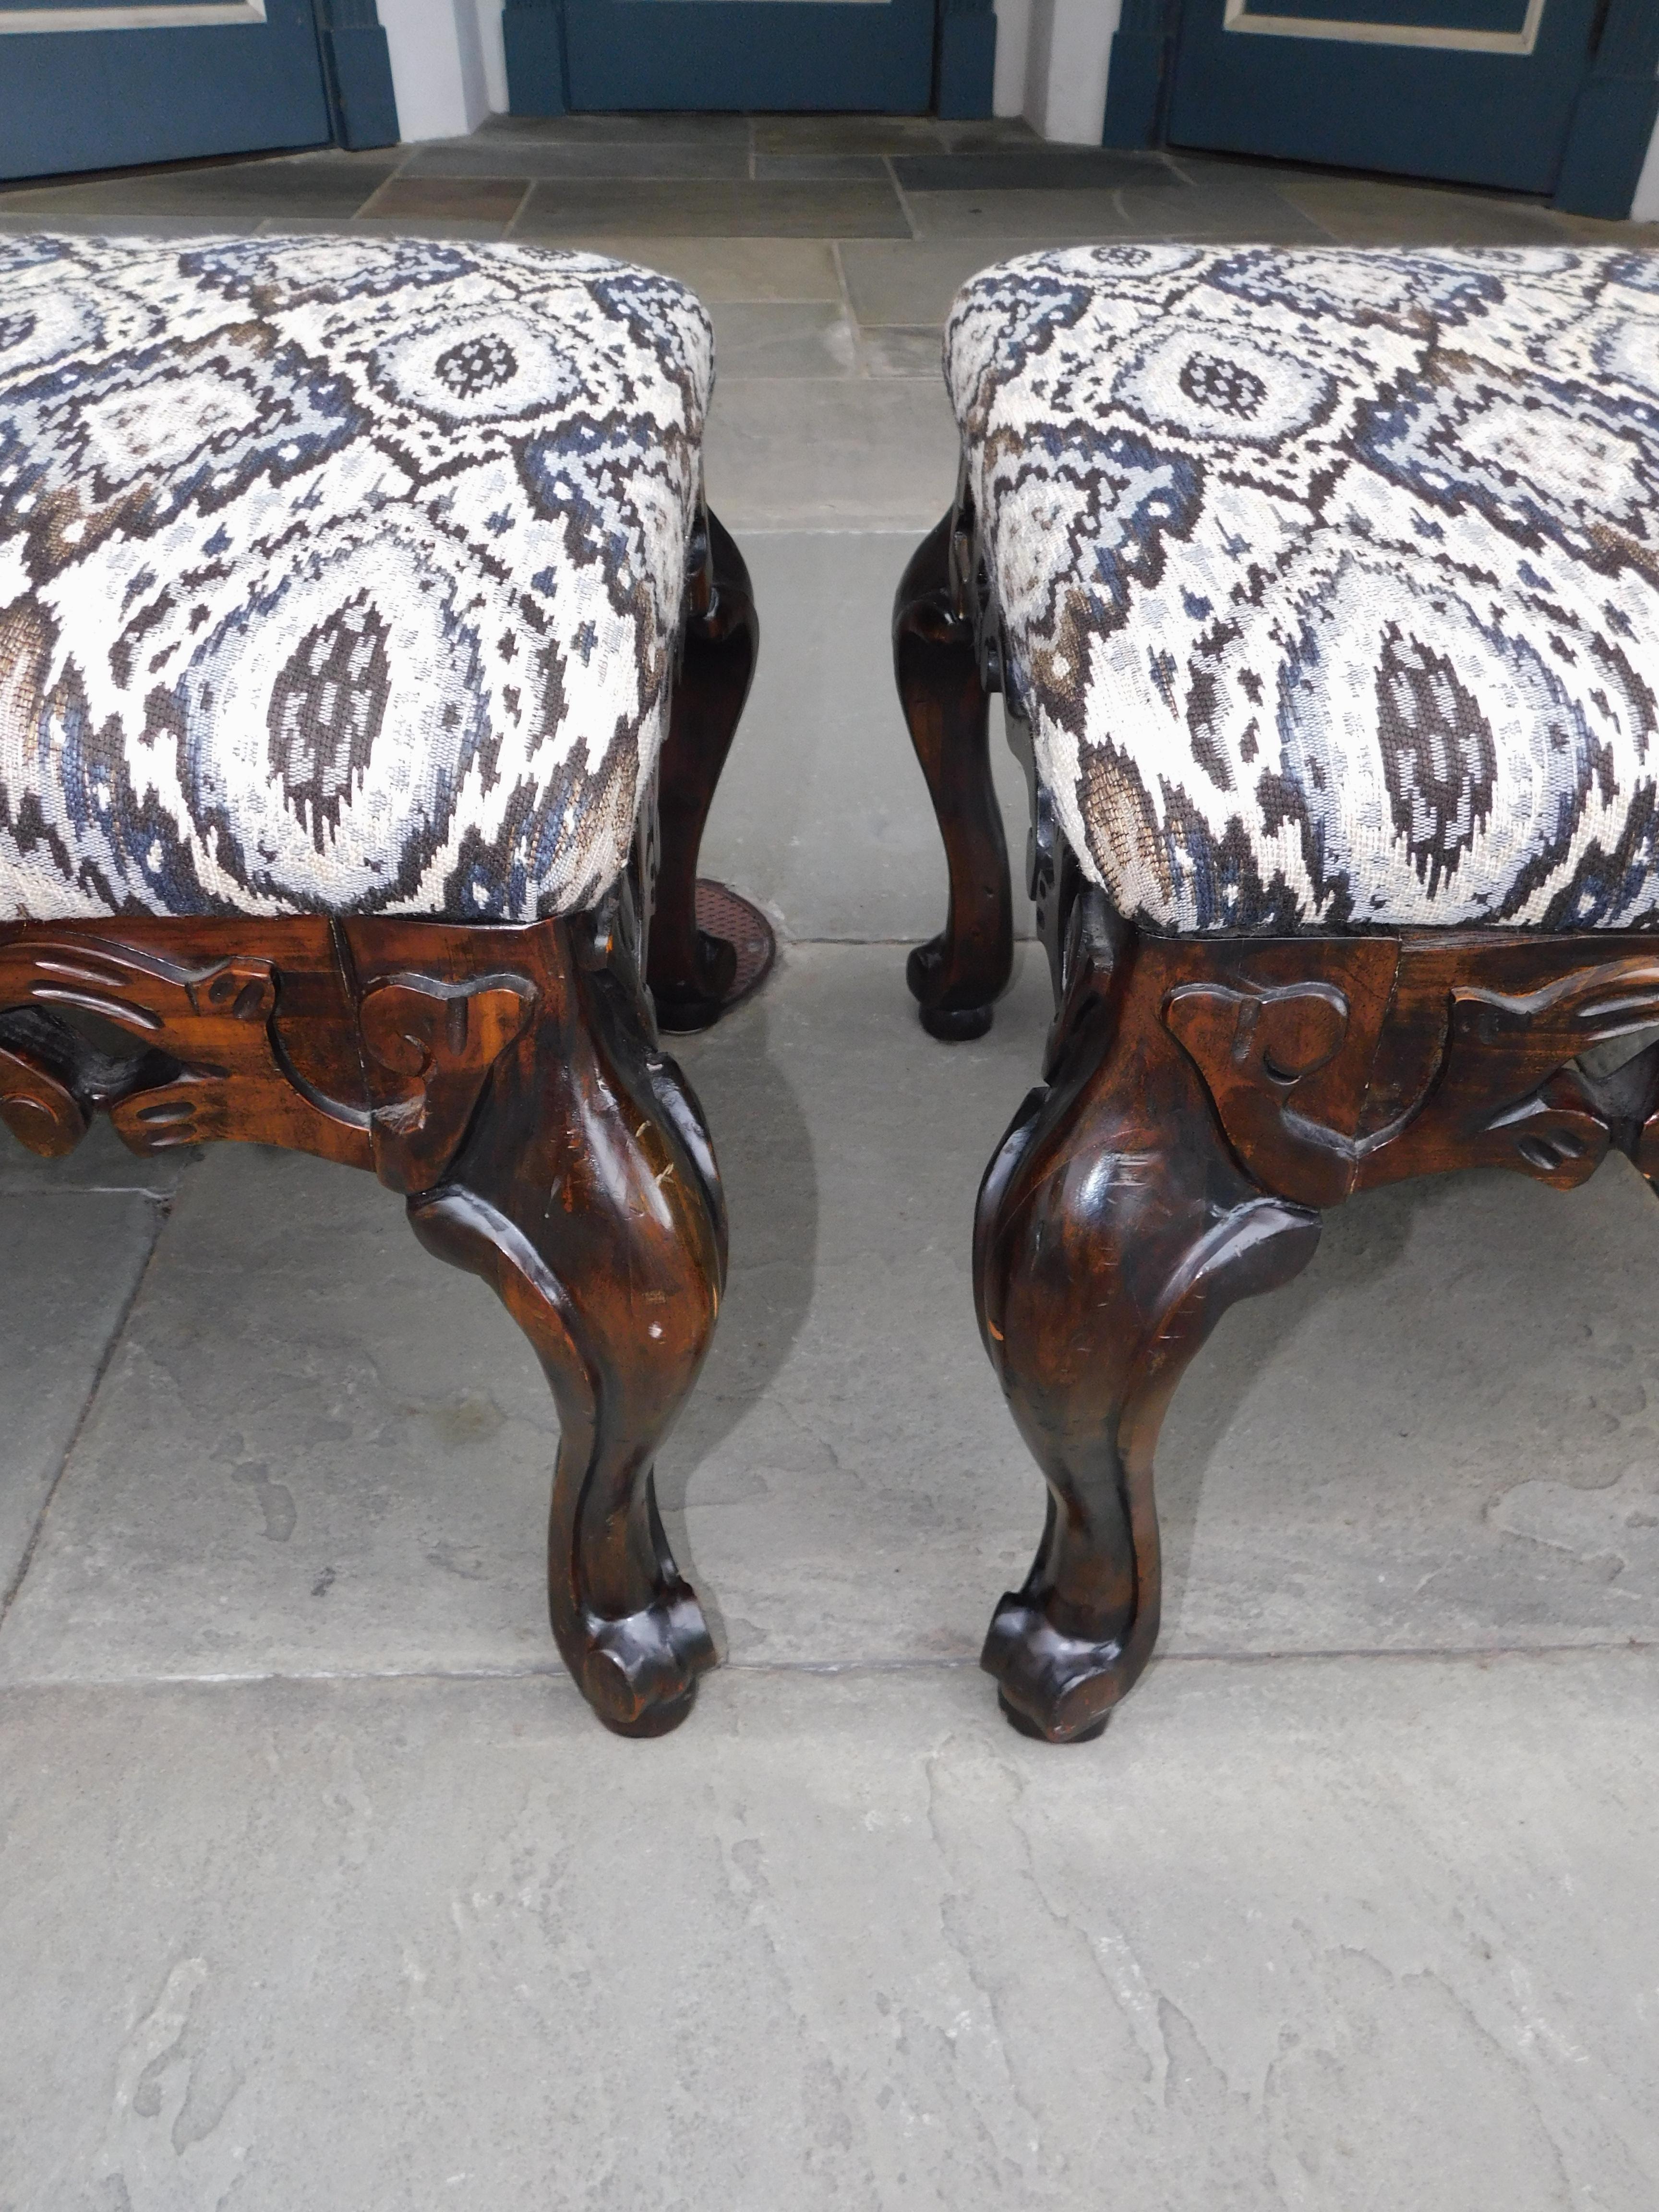 Pair of Italian Baroque Style Upholstered Benches with Cabriole Legs C. 1880 For Sale 3